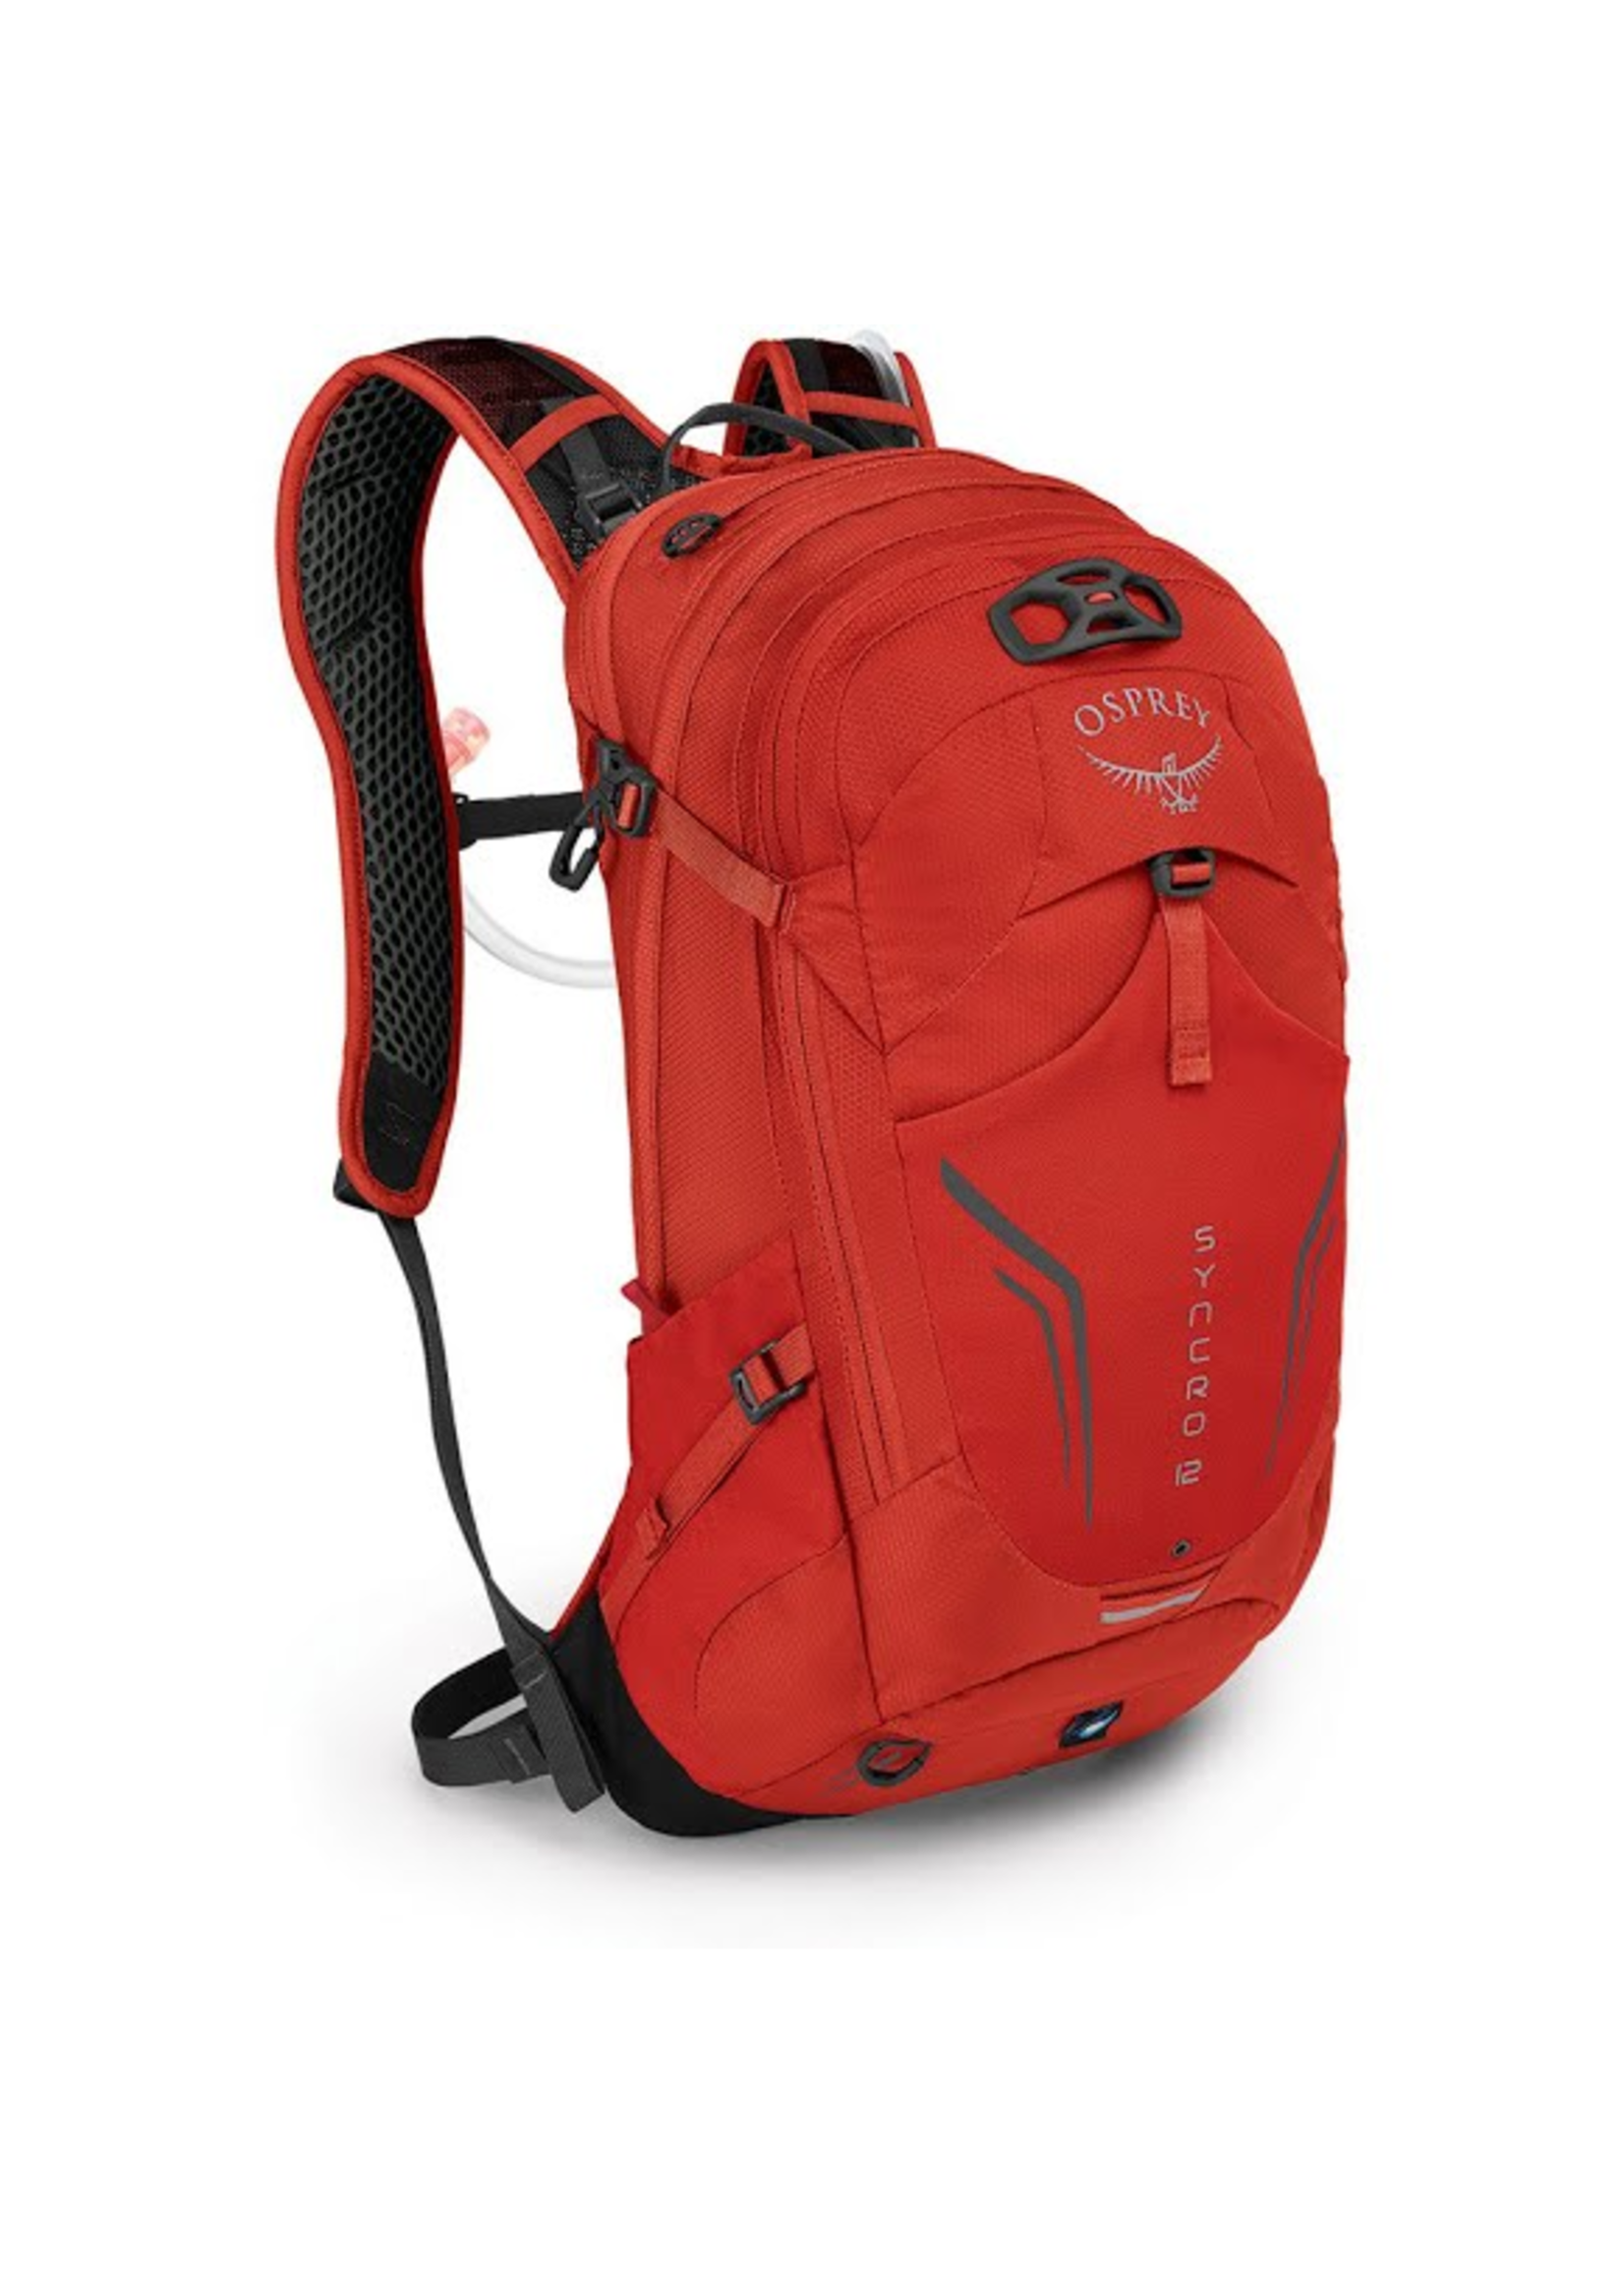 Osprey Syncro 12 with Reservoir